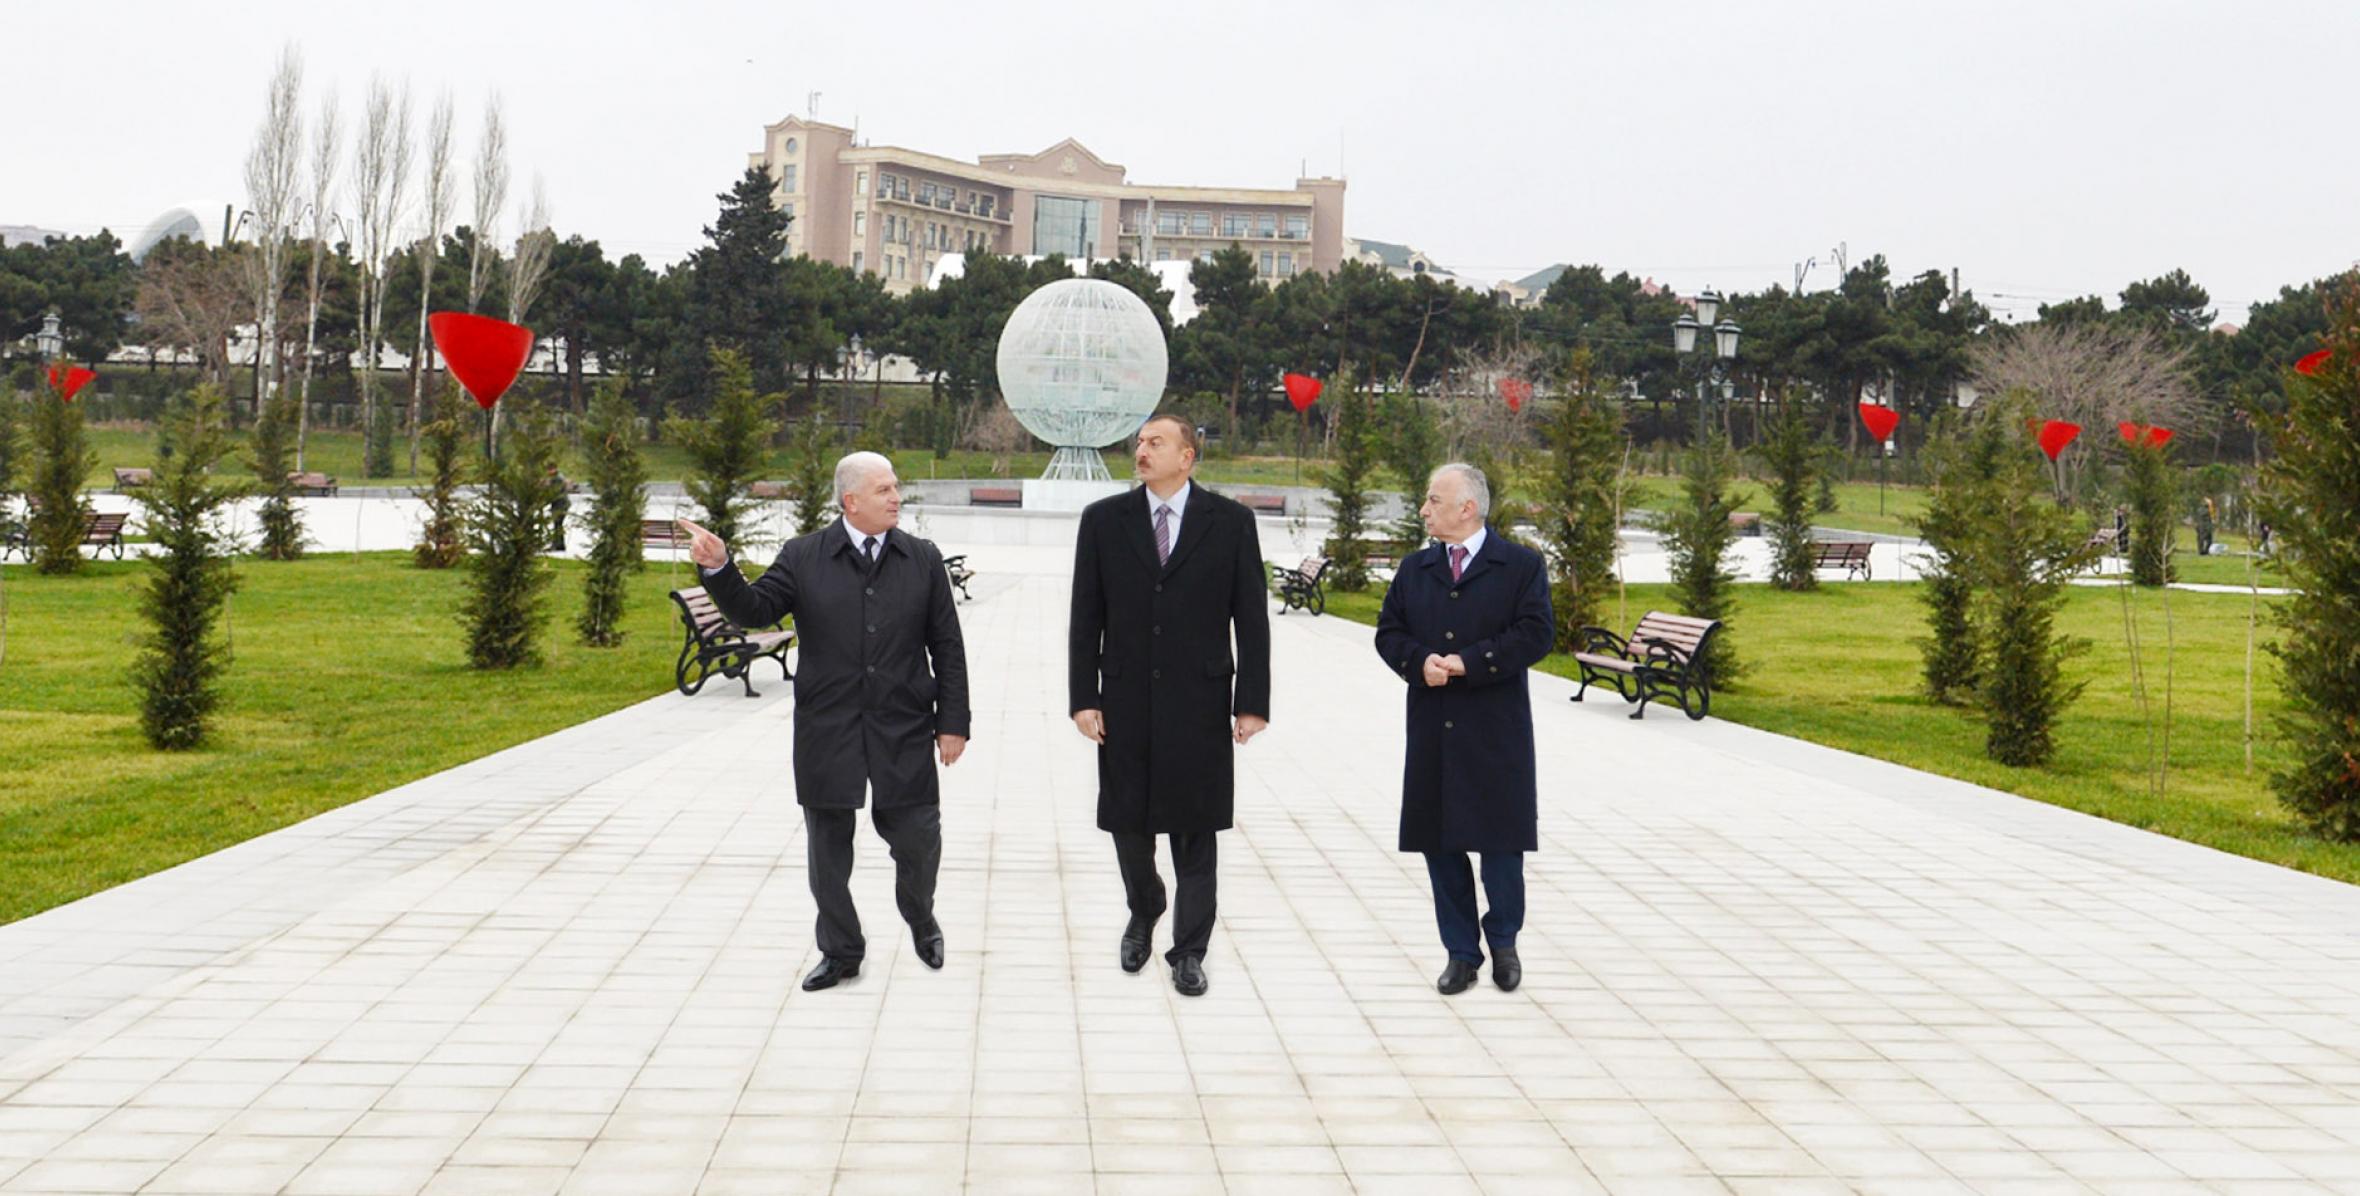 Ilham Aliyev reviewed a new park built in the Khatai district of Baku